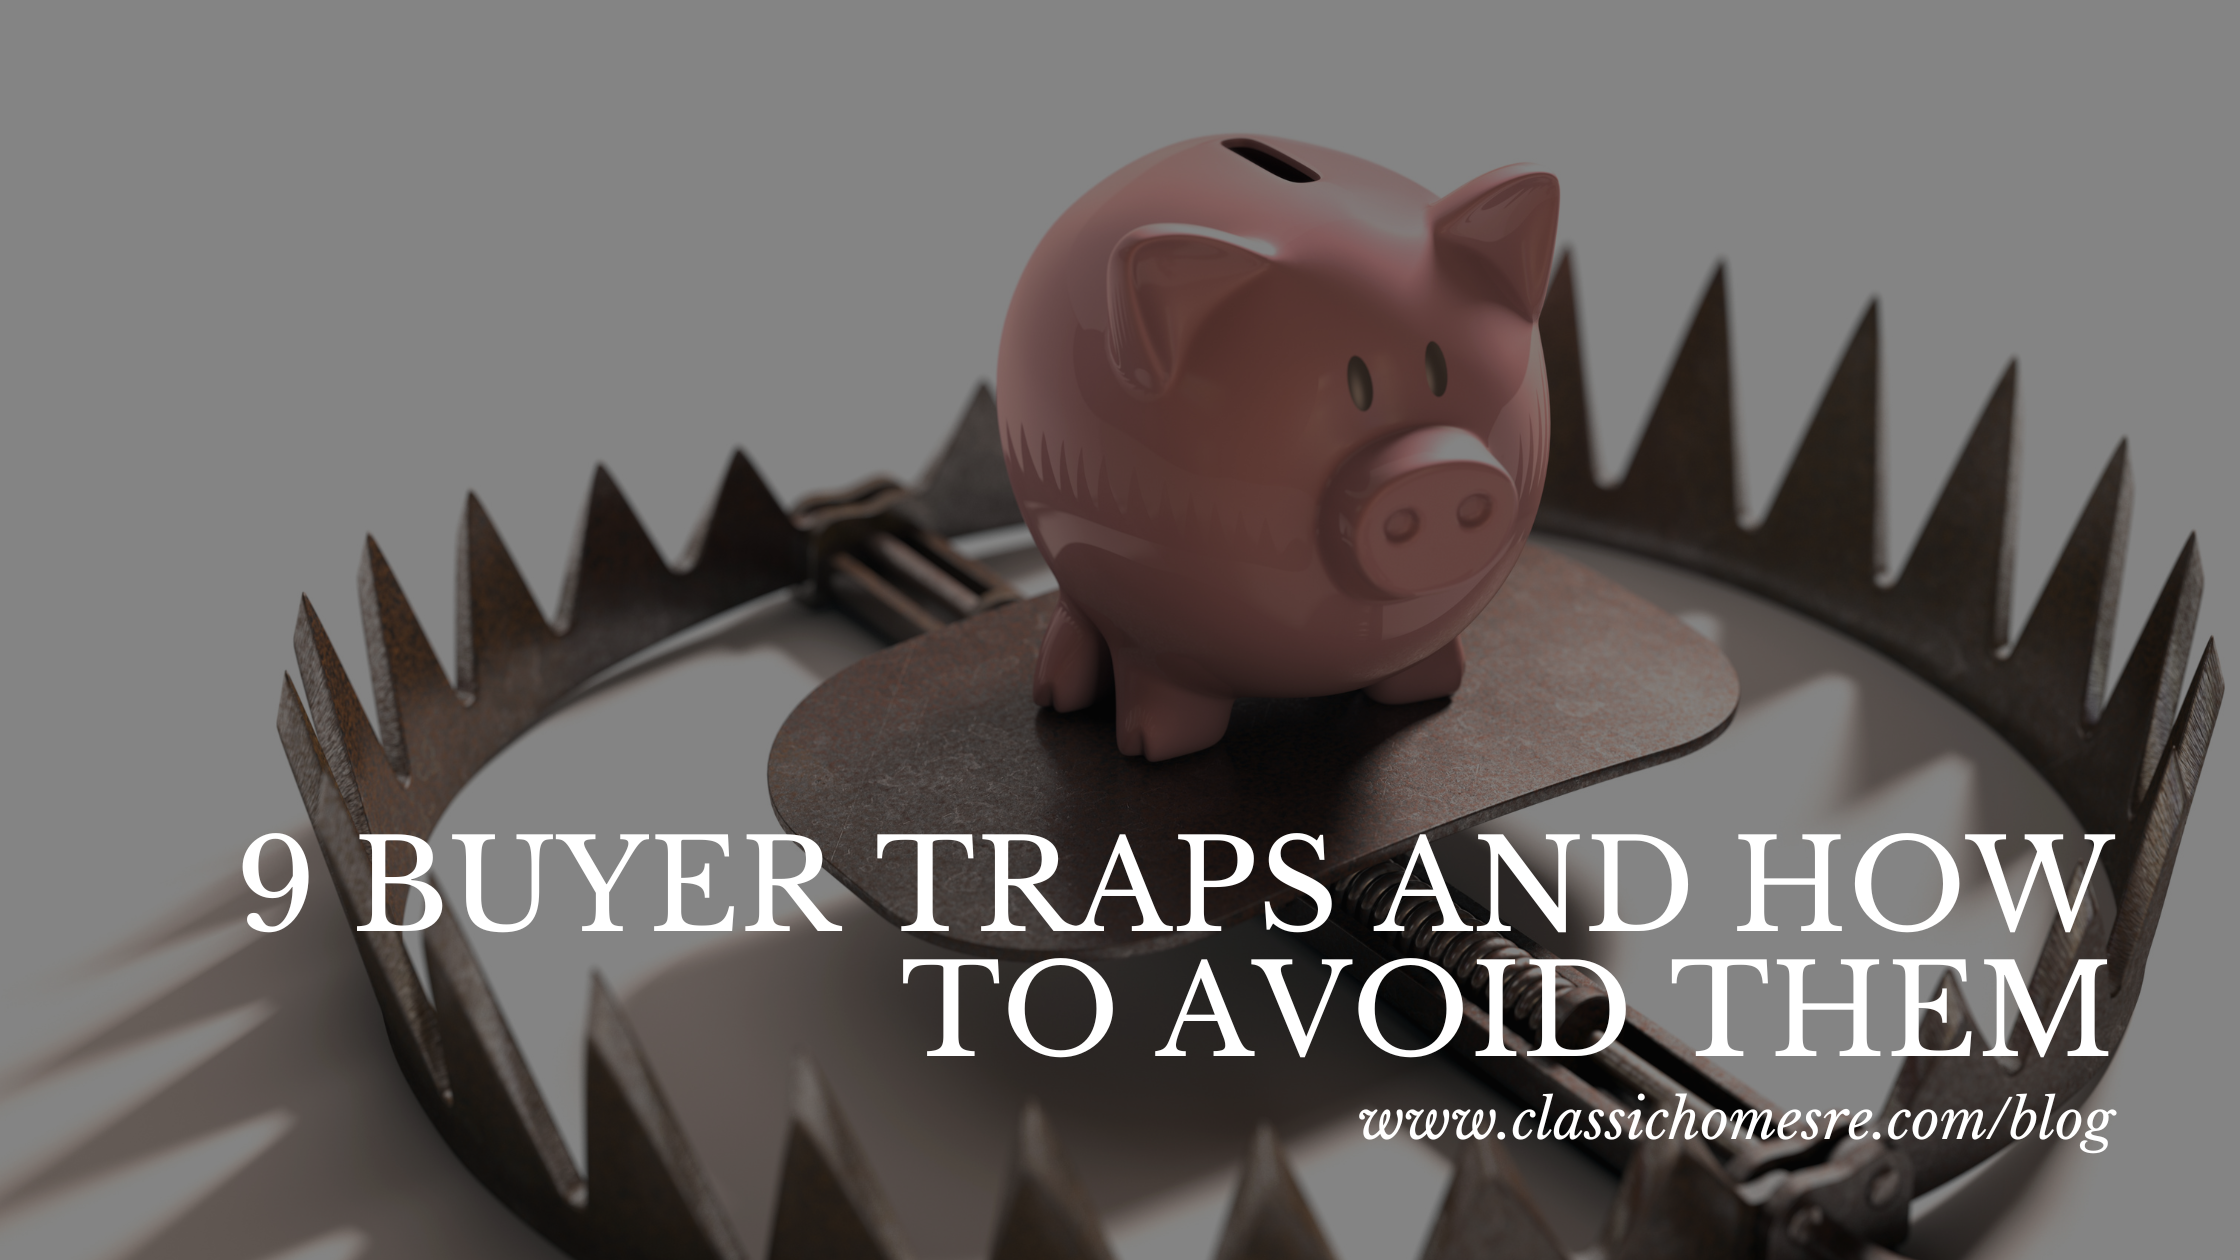 9 Buyer Traps and How to Avoid Them - Classic Homes Real Estate